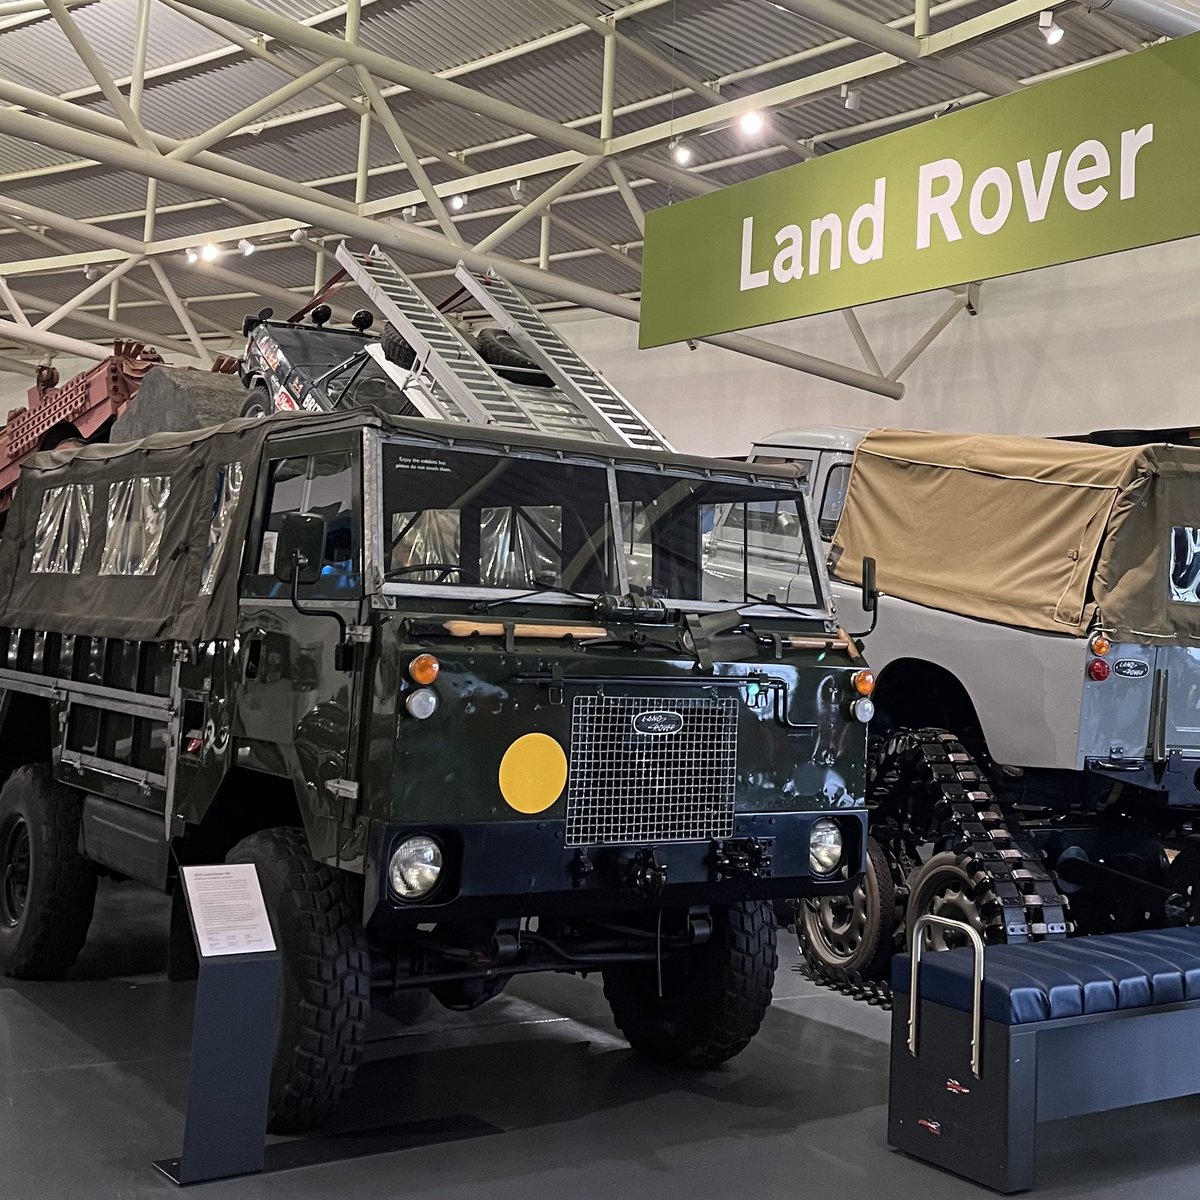 The Gaydon Land Rover Show is over for another year - but you can see the historic Land Rovers in our collection all year round! We have hundreds of adoptable cars, including #HUE166 and loads of other Land Rovers! To adopt from just £25, please visit britishmotormuseum.co.uk/support-us/ado…